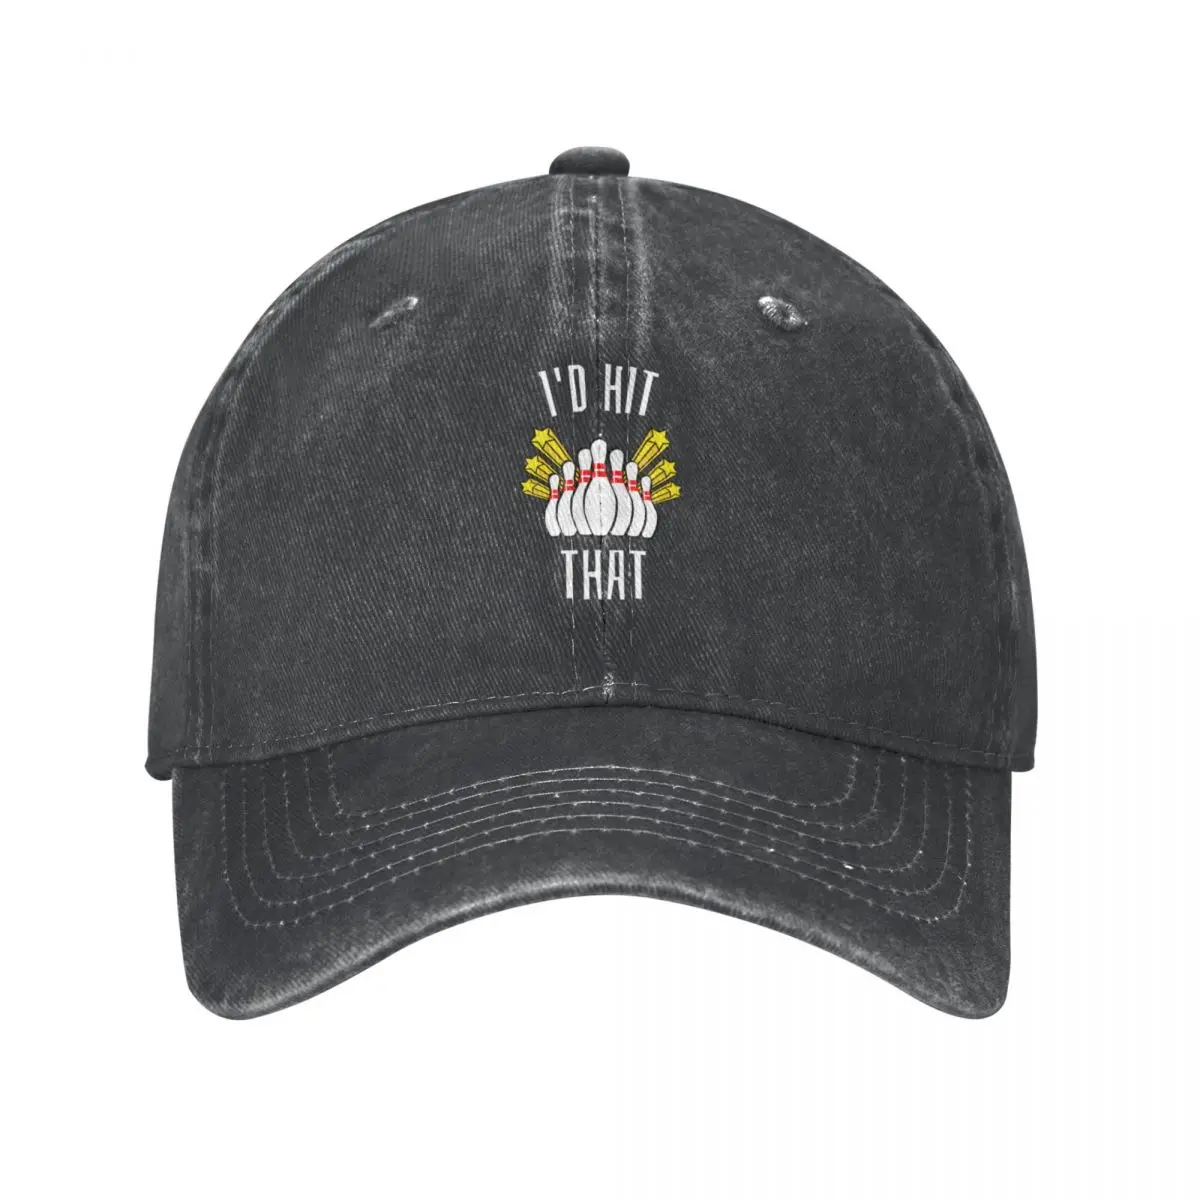 I'd Hit That - Funny Bowling Player Team Ball Love Lover Sports Lane Christmas Birthday Gift Cowboy Hat Golf Caps Male Women's